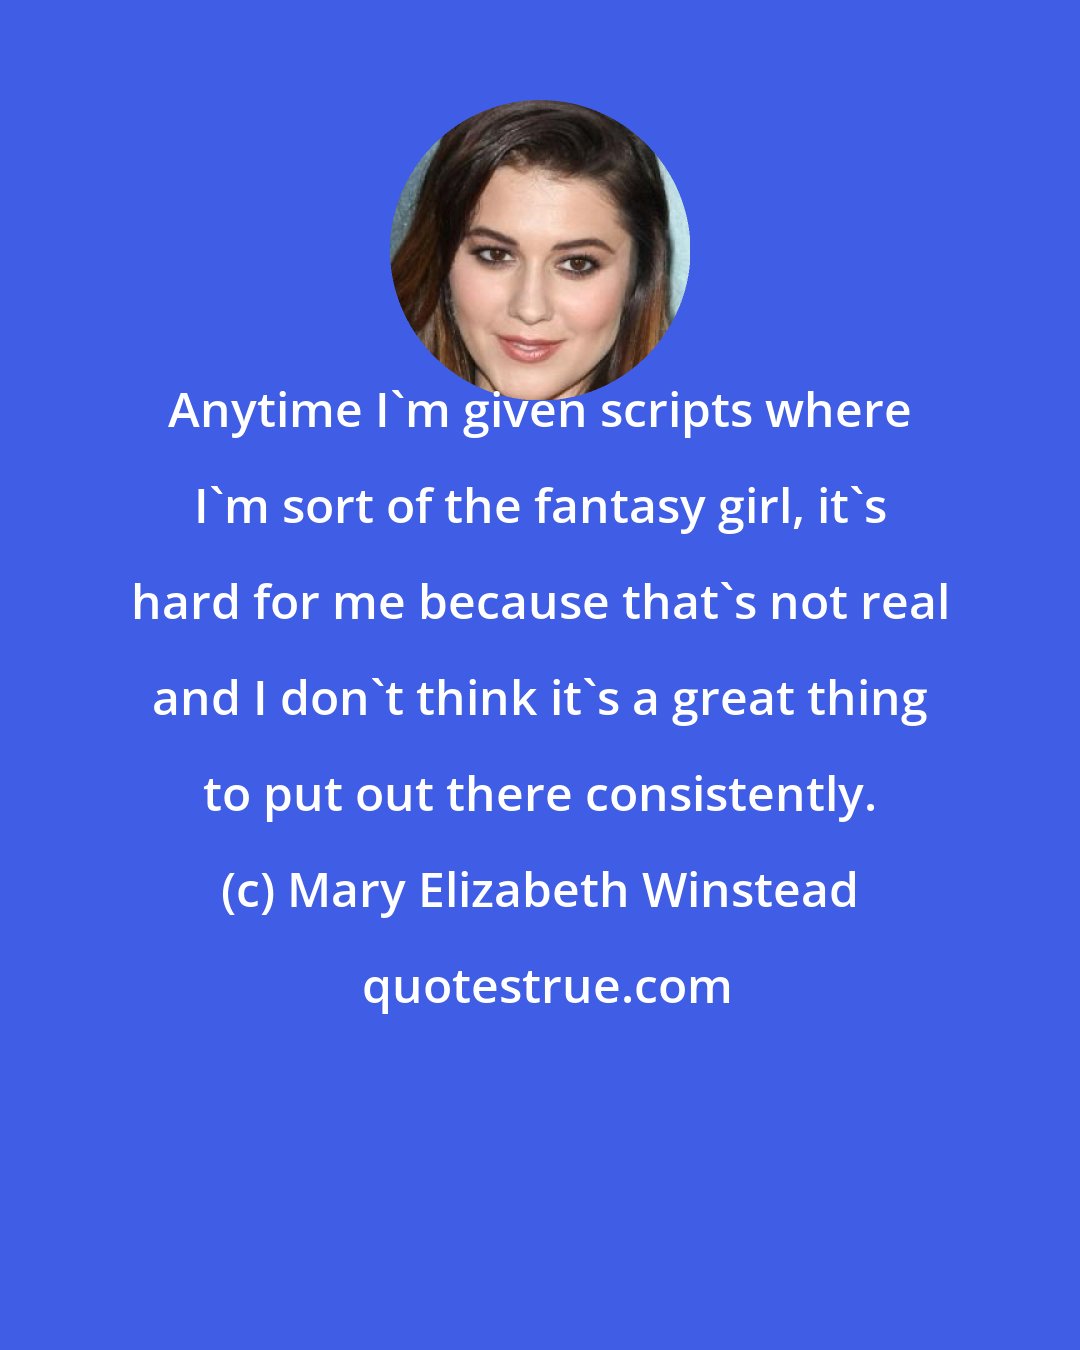 Mary Elizabeth Winstead: Anytime I'm given scripts where I'm sort of the fantasy girl, it's hard for me because that's not real and I don't think it's a great thing to put out there consistently.